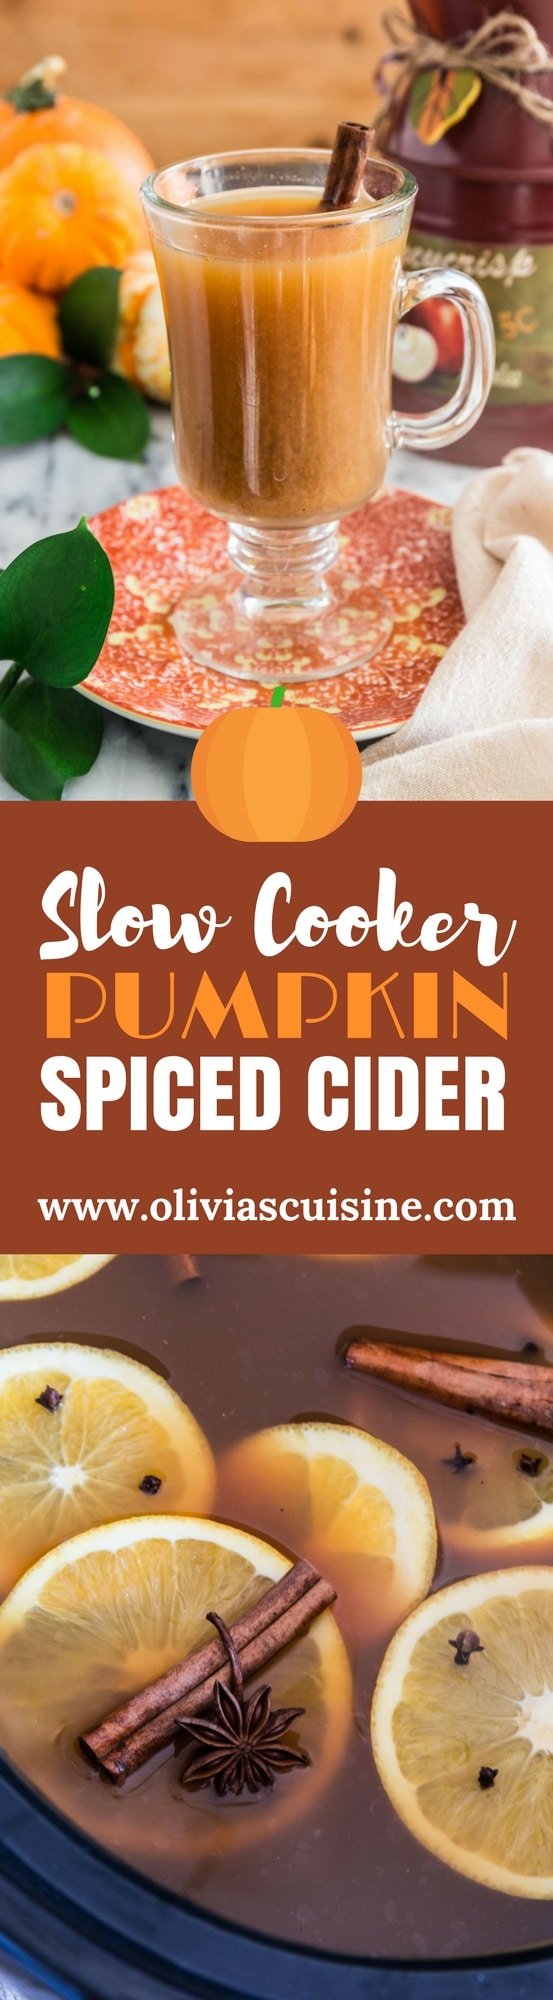 Slow Cooker Pumpkin Spiced Cider | www.oliviascuisine.com | All the cozy flavors of Fall in one drink! Made in the slow cooker, this delicious Pumpkin Spiced Cider will lift your spirits and make your house smell like happiness!